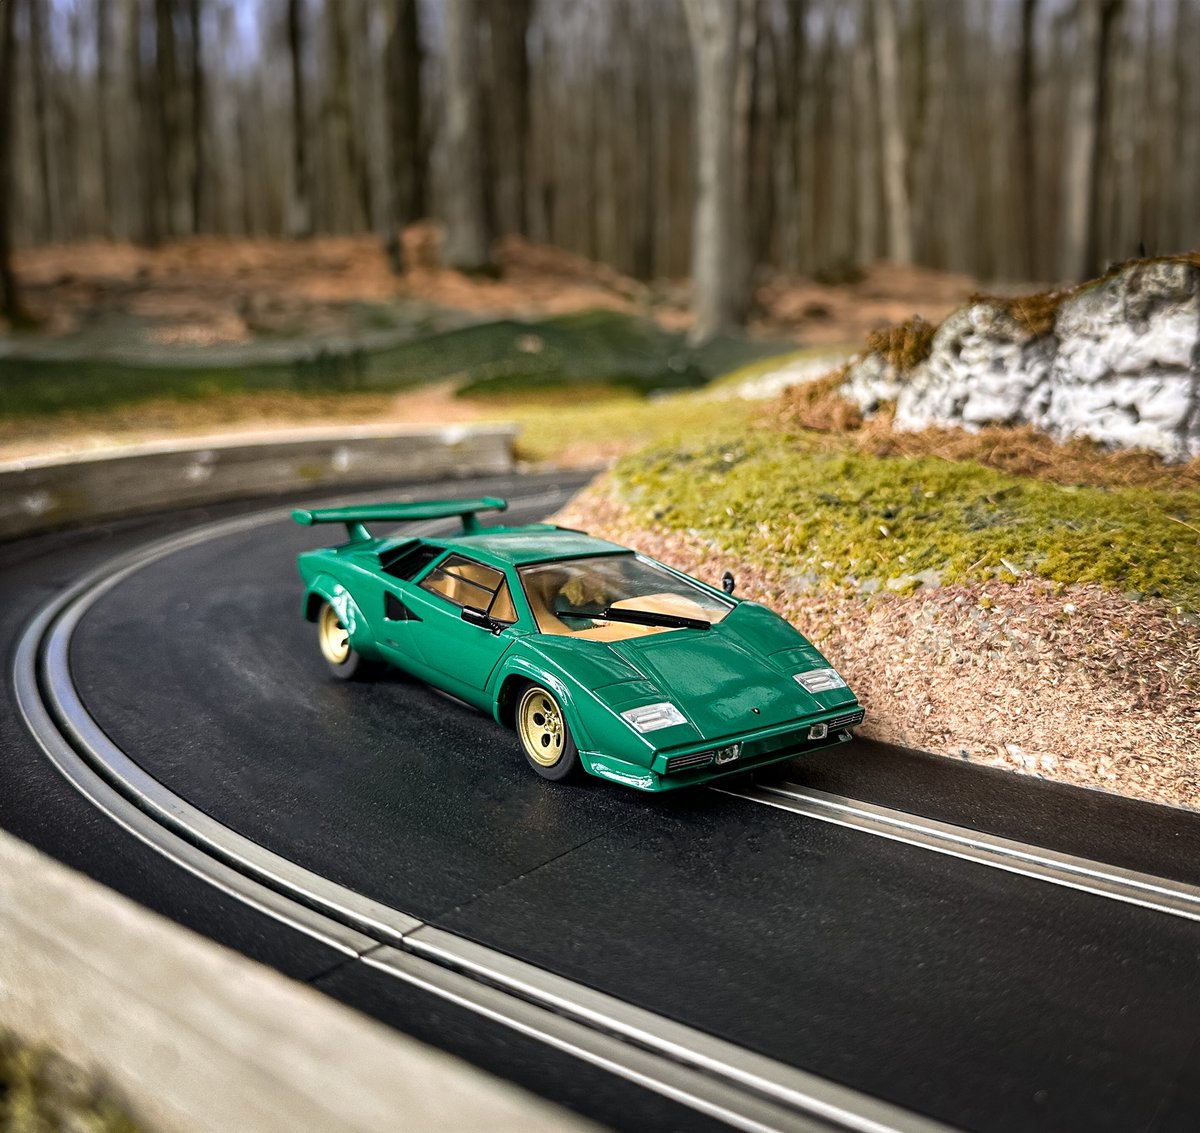 Have you got your hands on the new green Lamborghini Countach? If not, you’re missing out! Add this stunning car to your collection here 👉 bit.ly/43zenAT